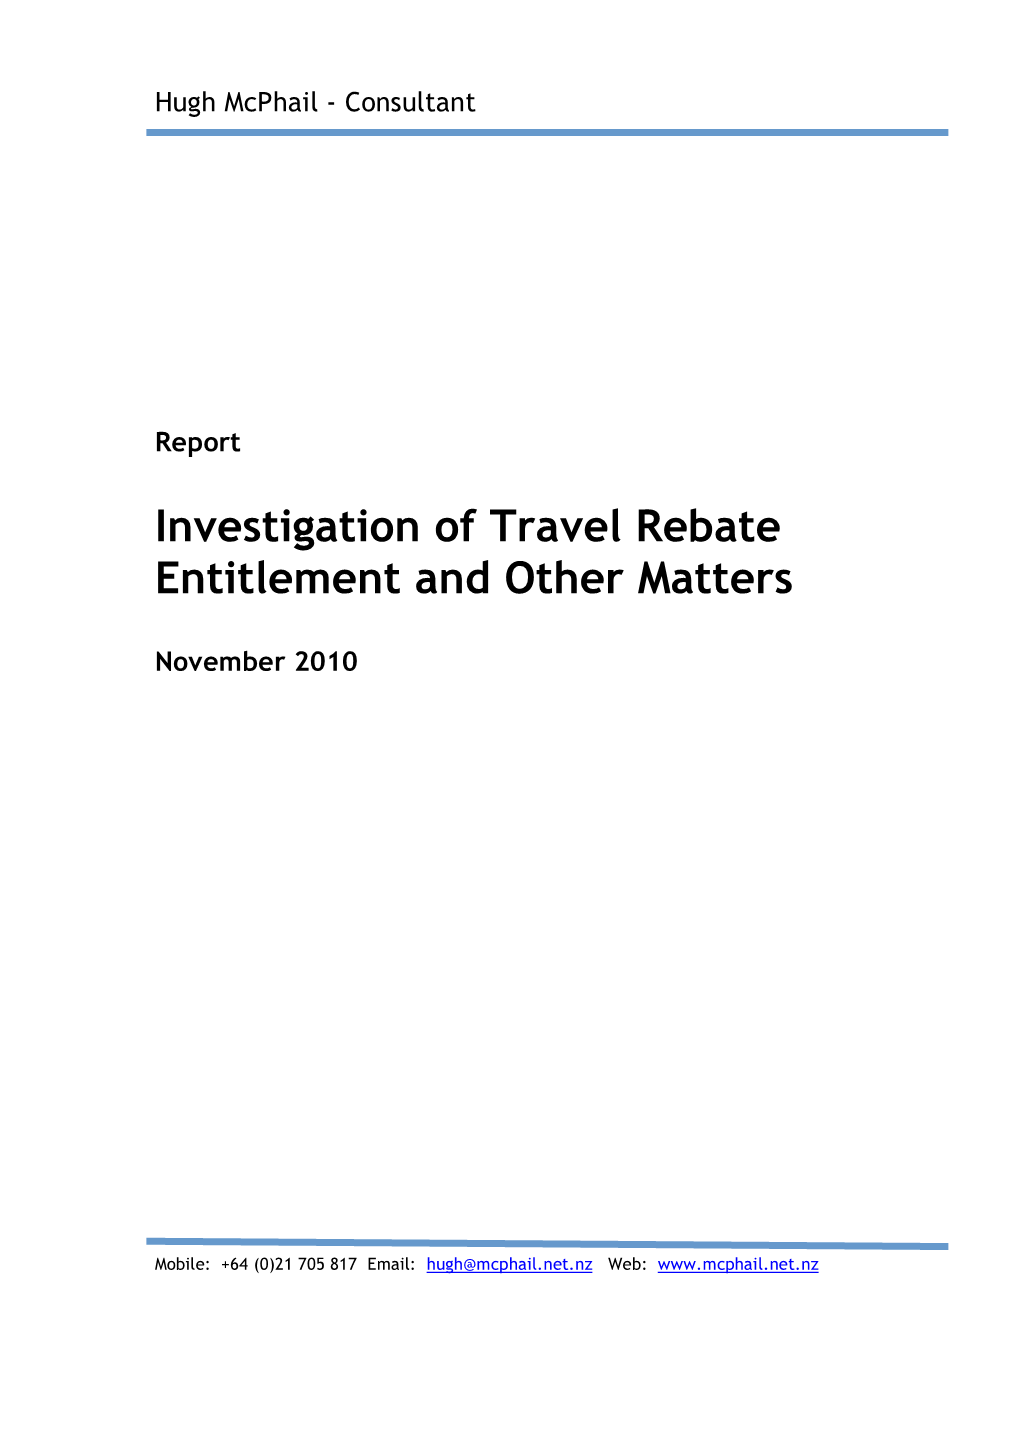 Investigation of Travel Rebate Entitlement and Other Matters